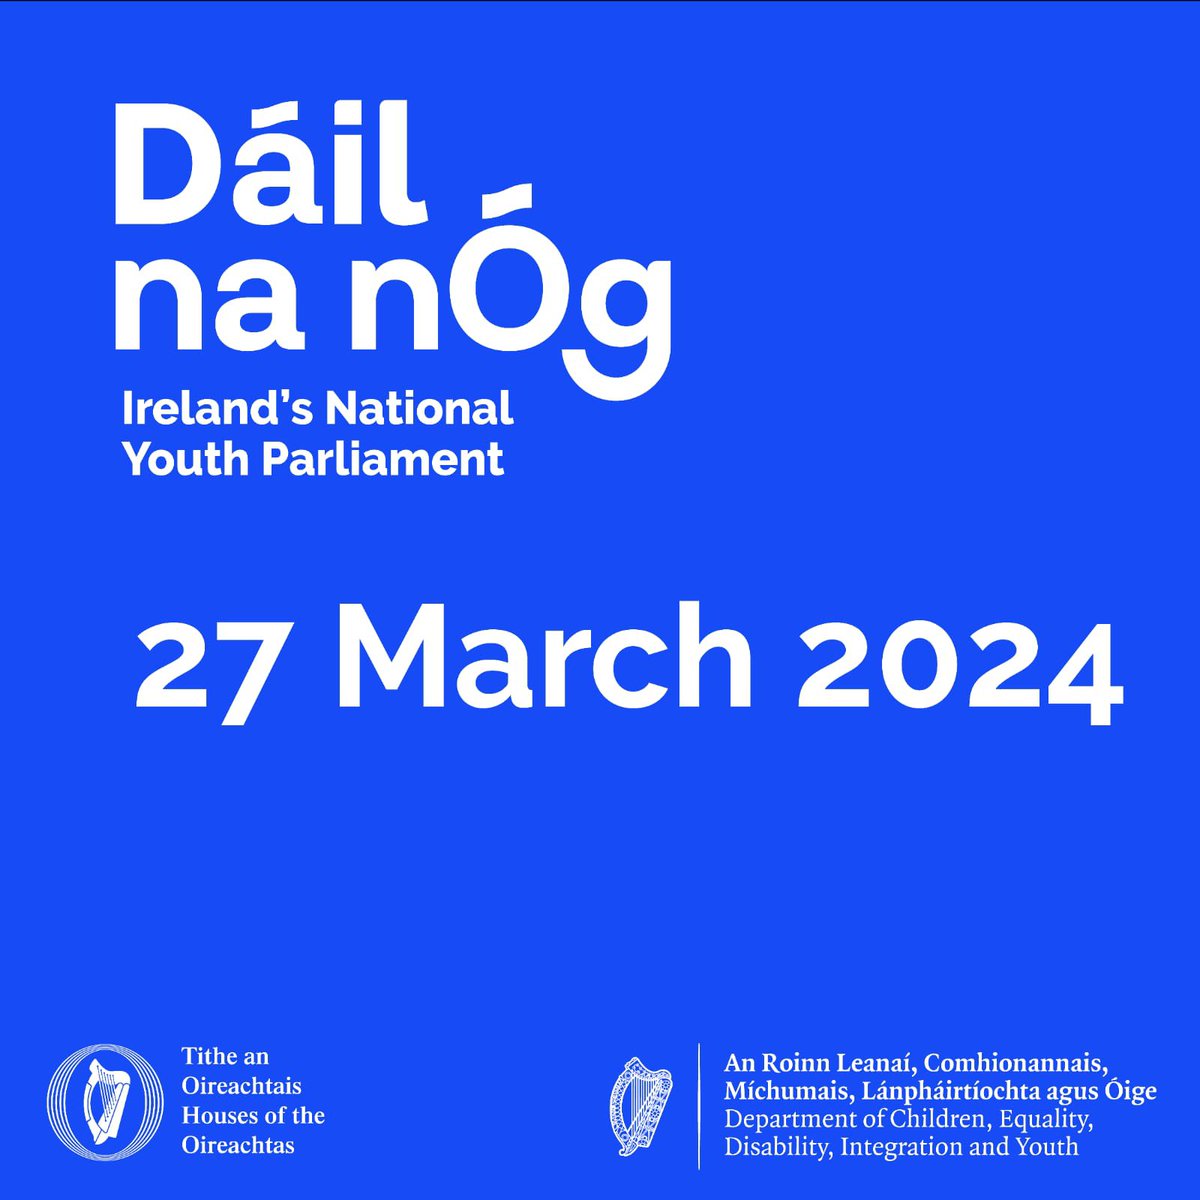 🔵 Huge best of luck to all the young people going to Leinster House today for Dáil na nÓg 2024! #dailnanog | @OireachtasNews | @dcediy